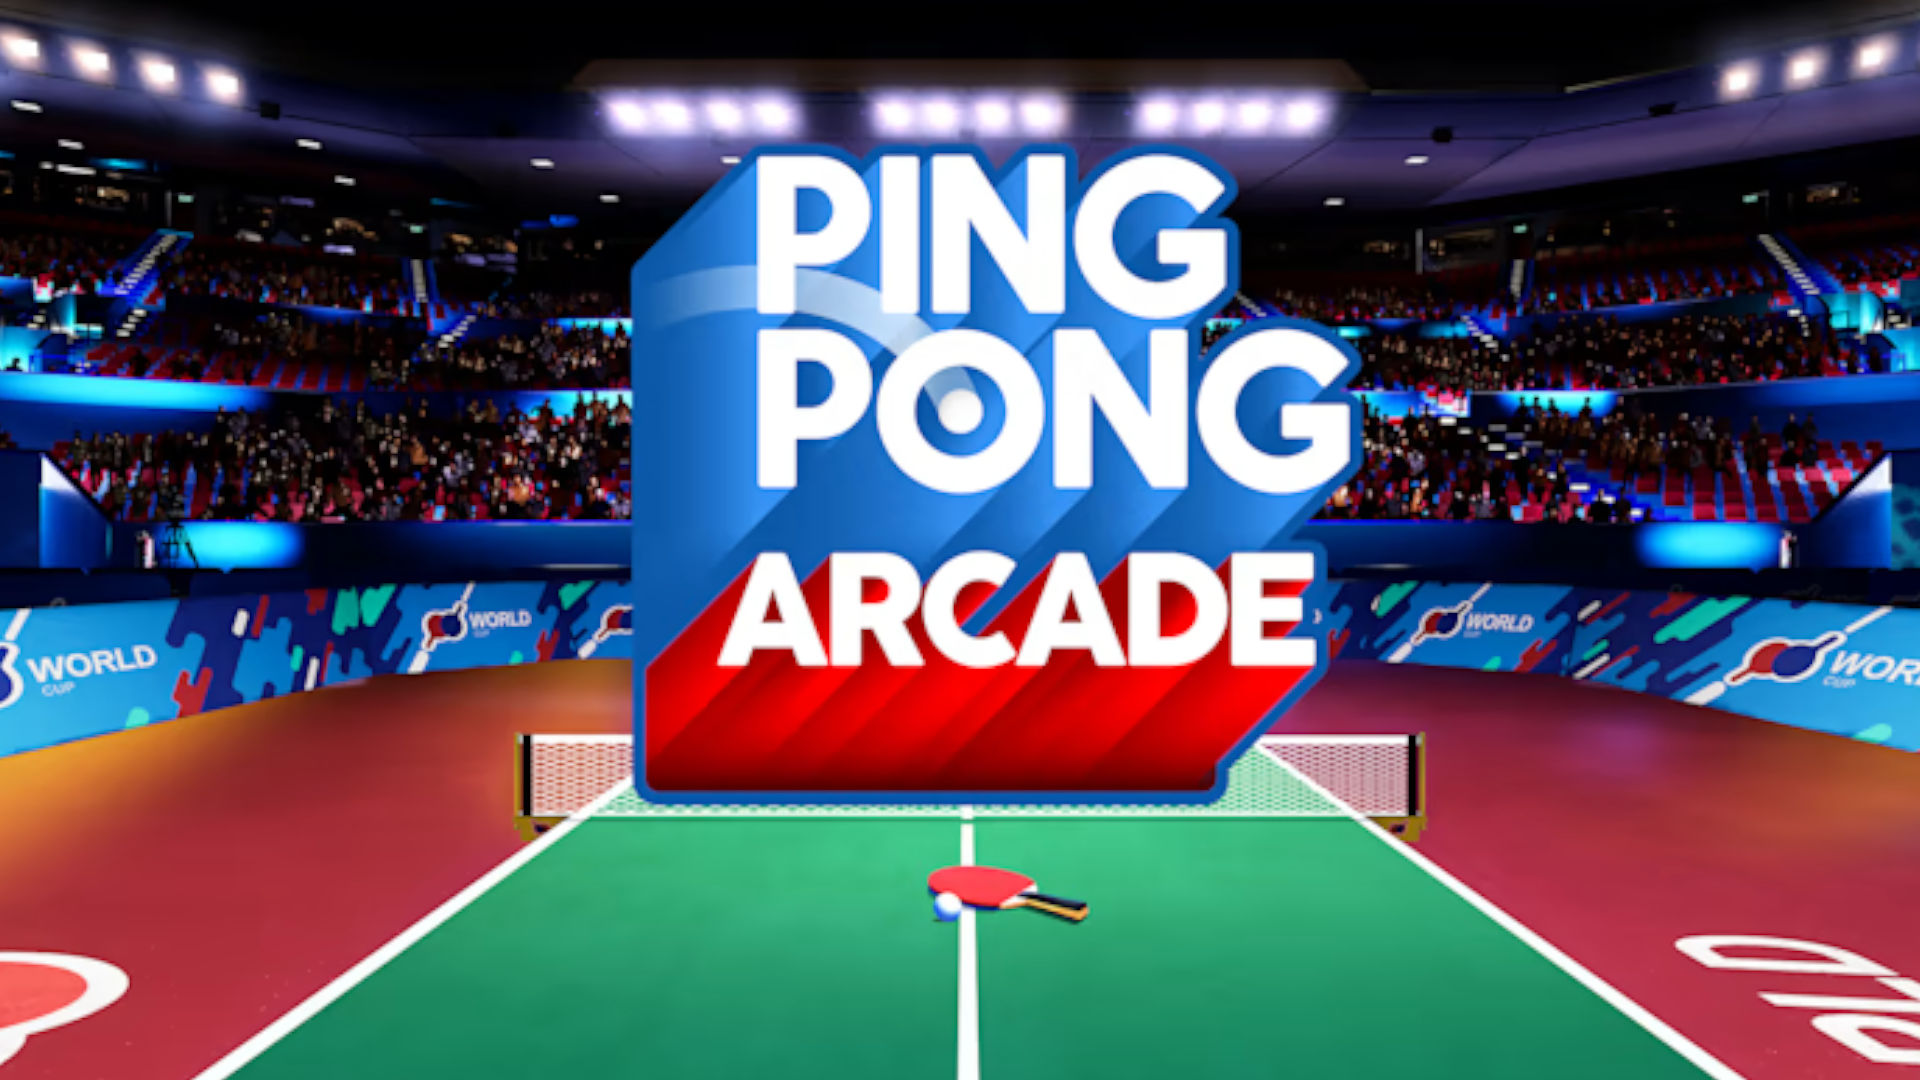 Ping Pong Arcade, one of the upcoming ping pong games on Switch